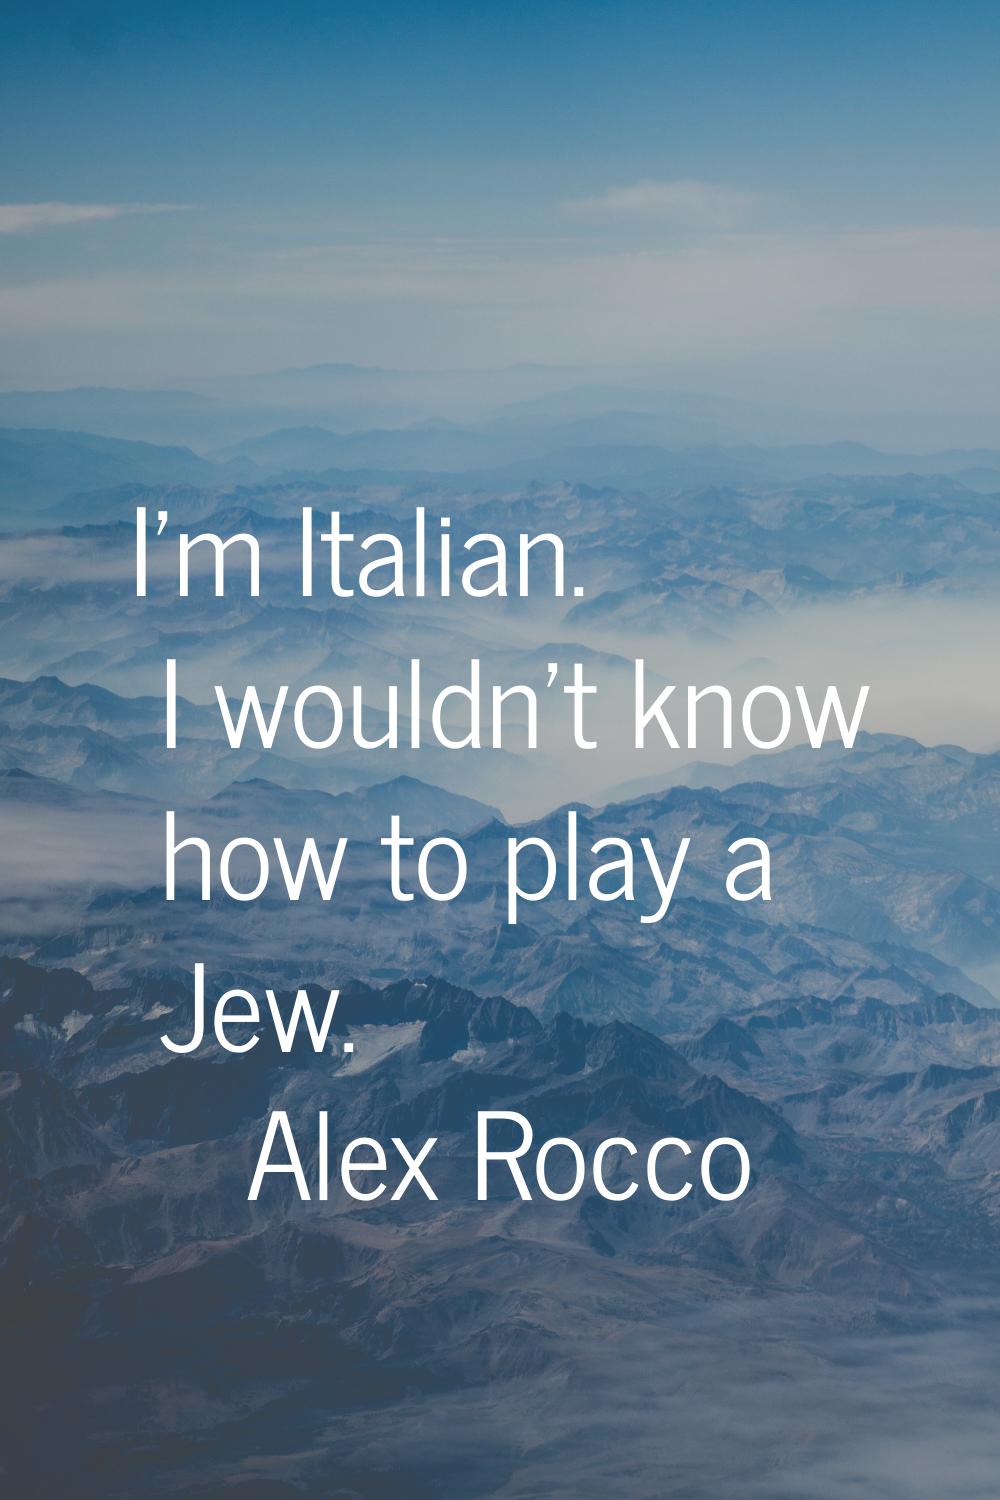 I'm Italian. I wouldn't know how to play a Jew.